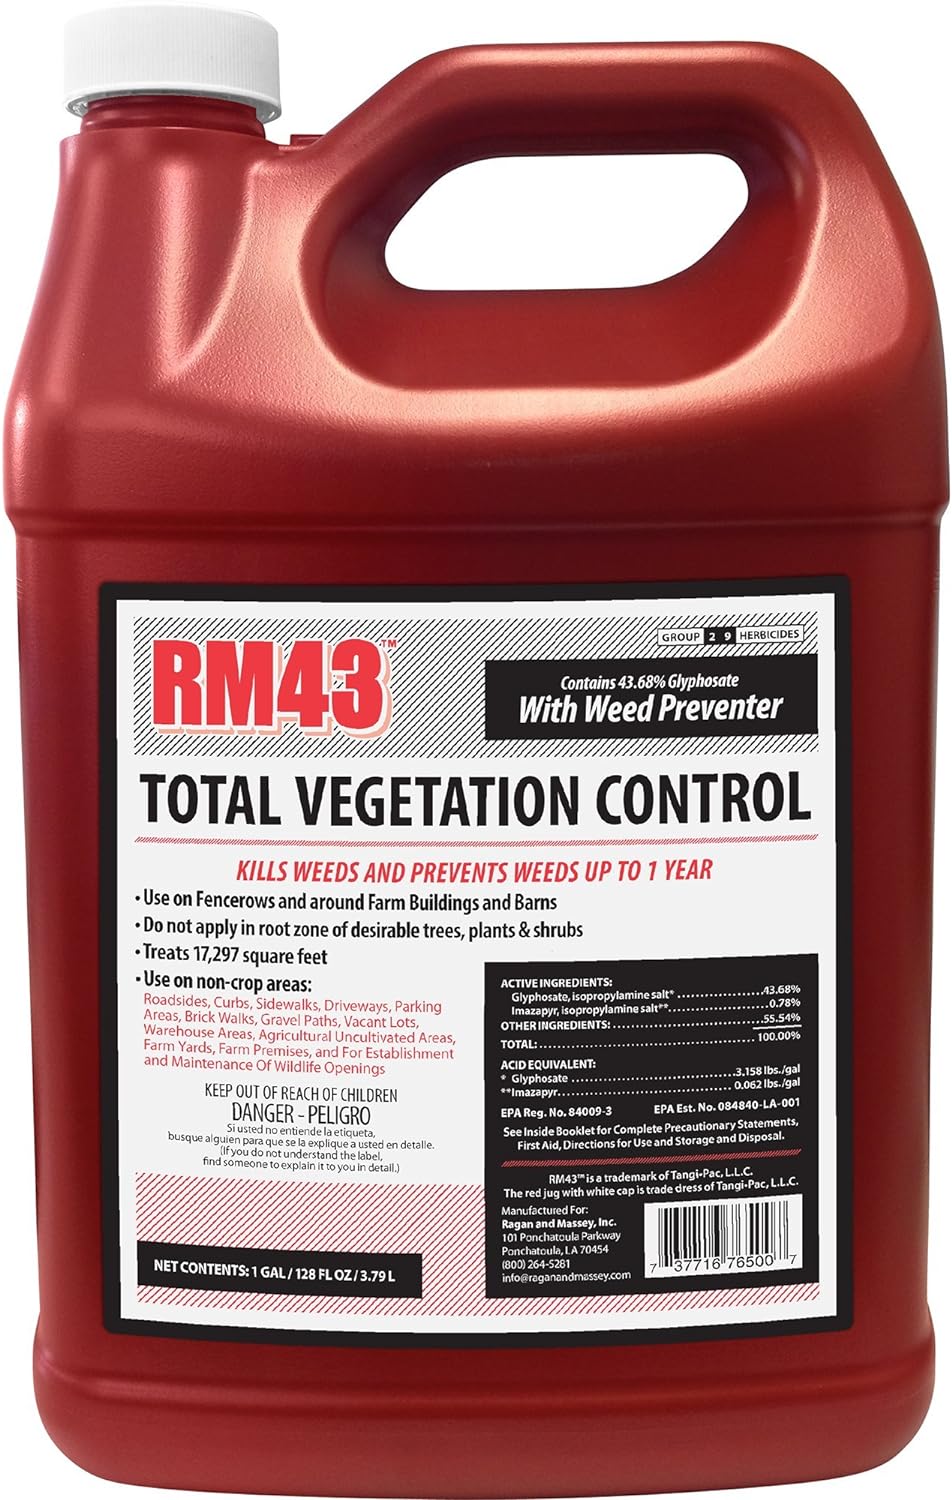 Best Overall Herbicide: Top Solutions for Total Weed Control